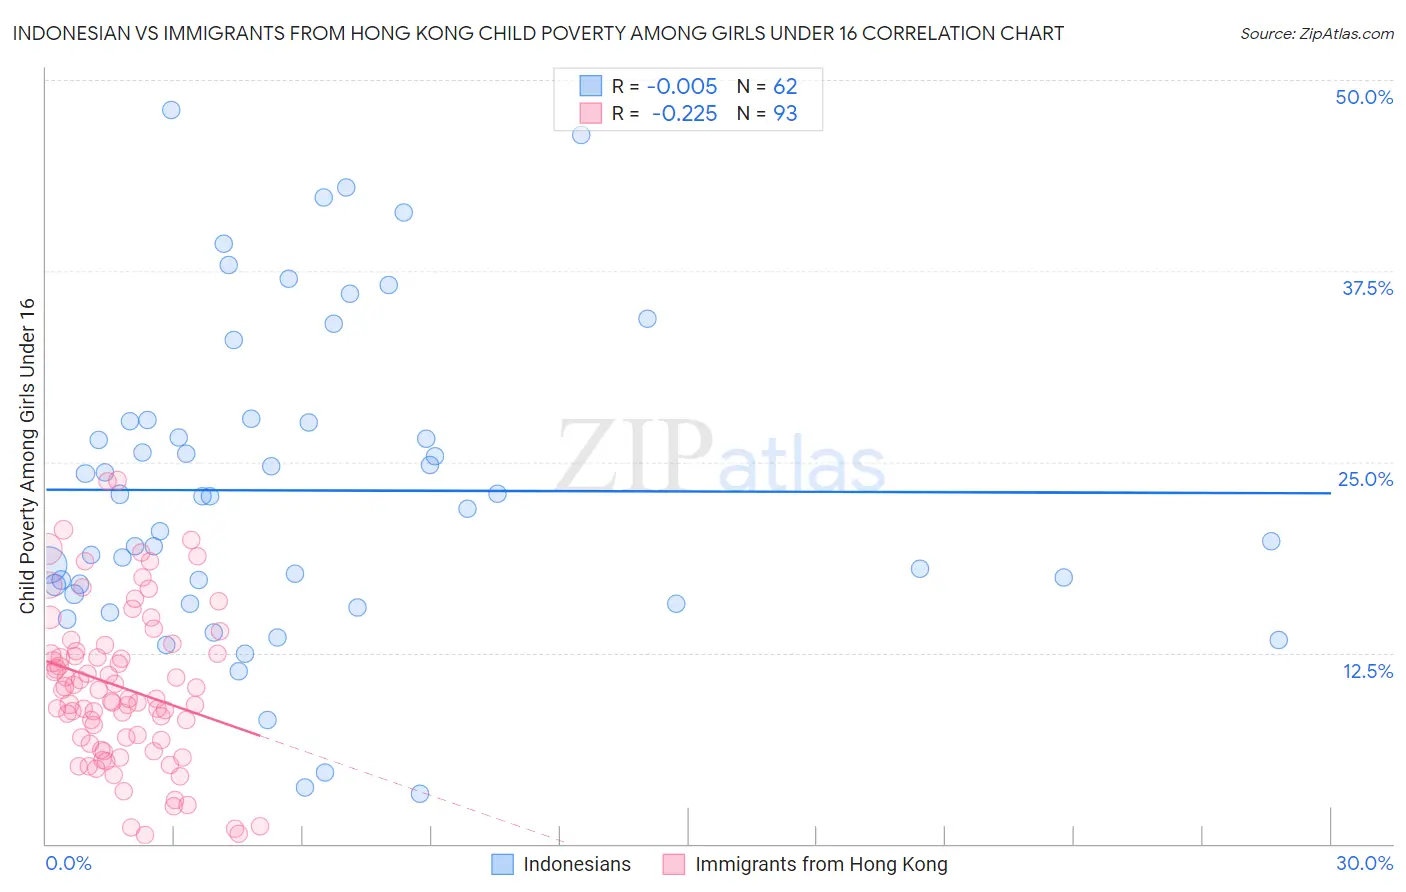 Indonesian vs Immigrants from Hong Kong Child Poverty Among Girls Under 16